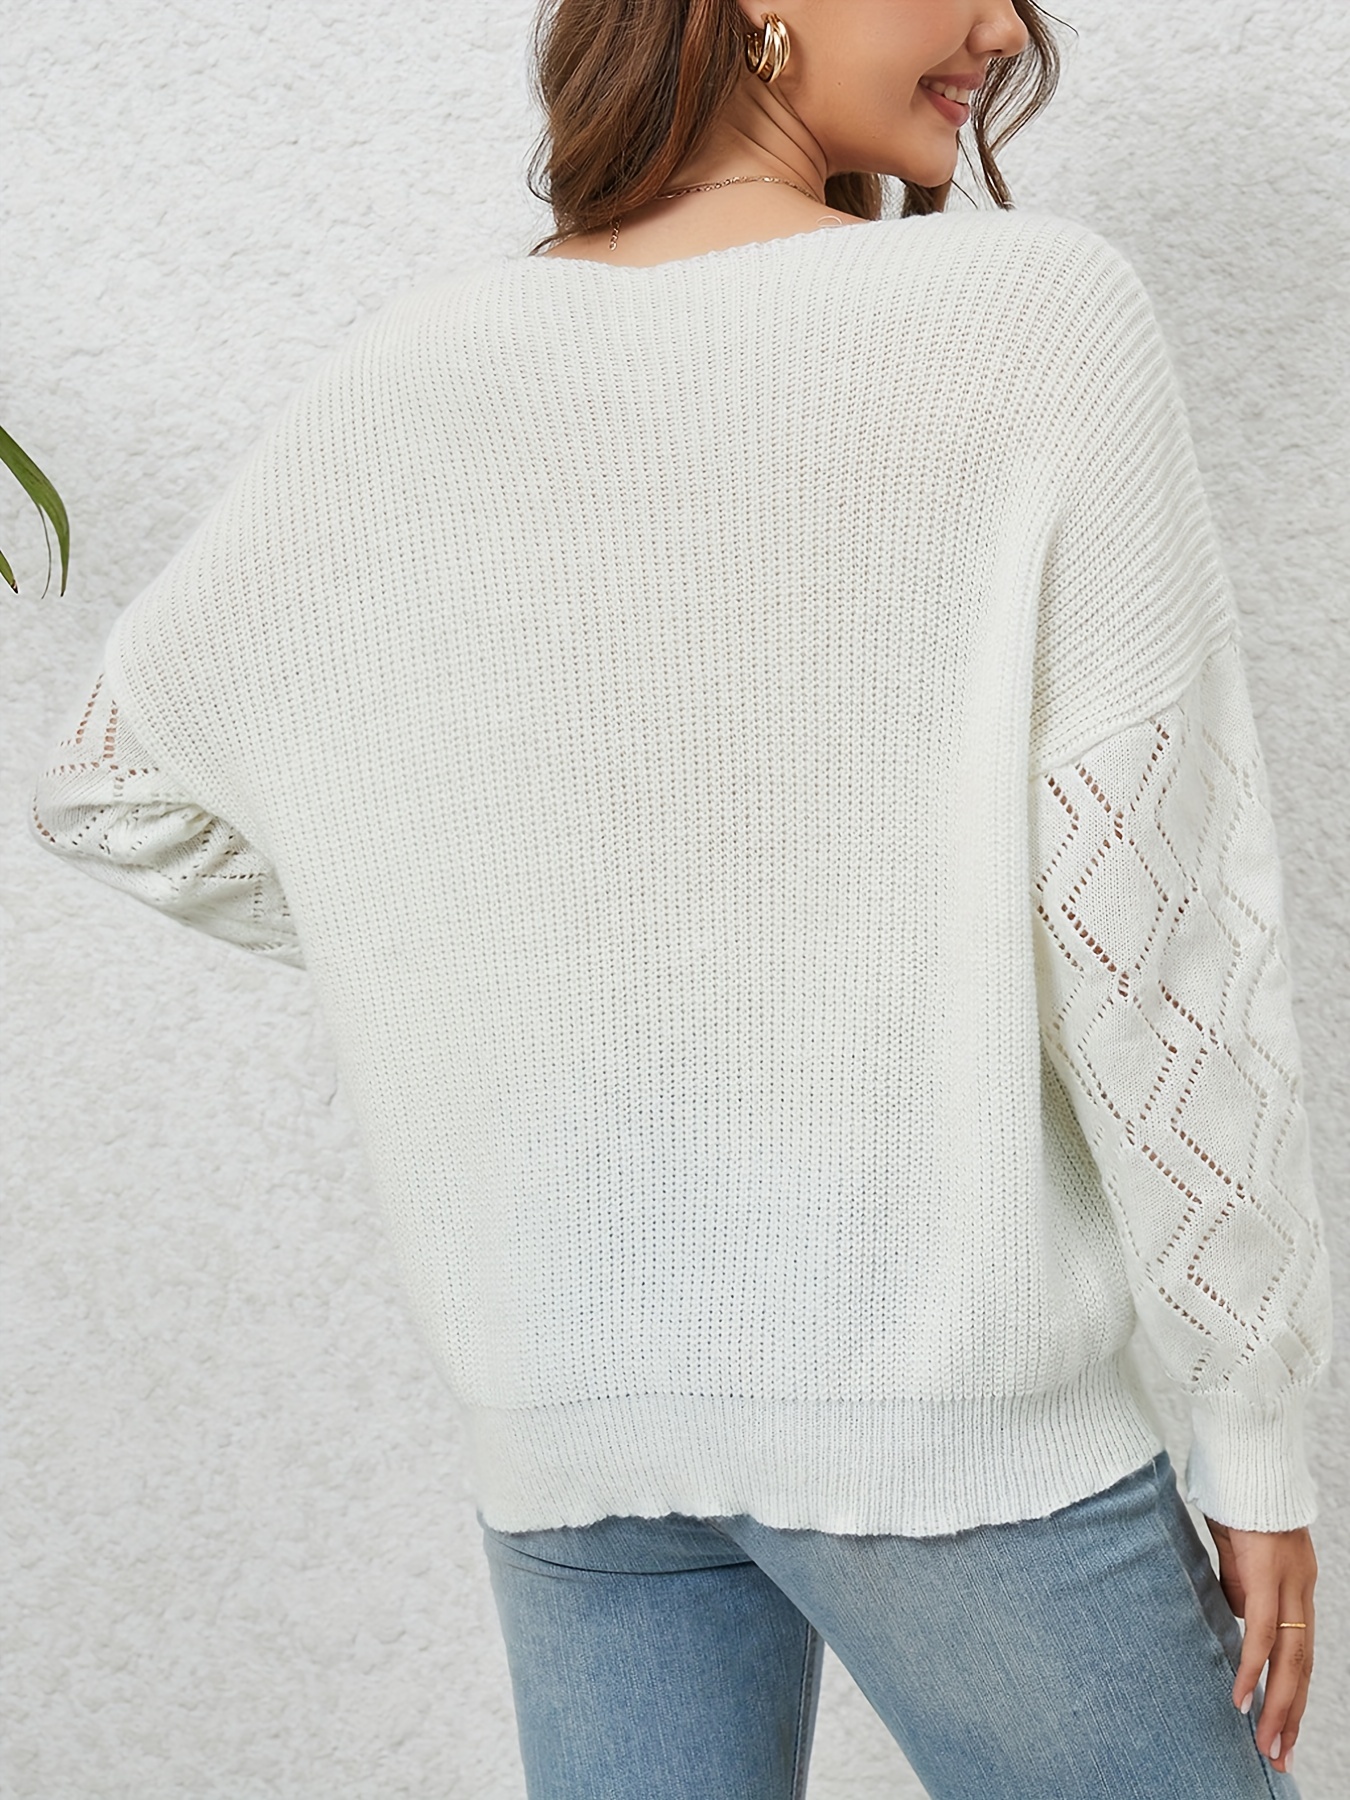  Guipure Lace Panel Pointelle Knit Sweater (Color